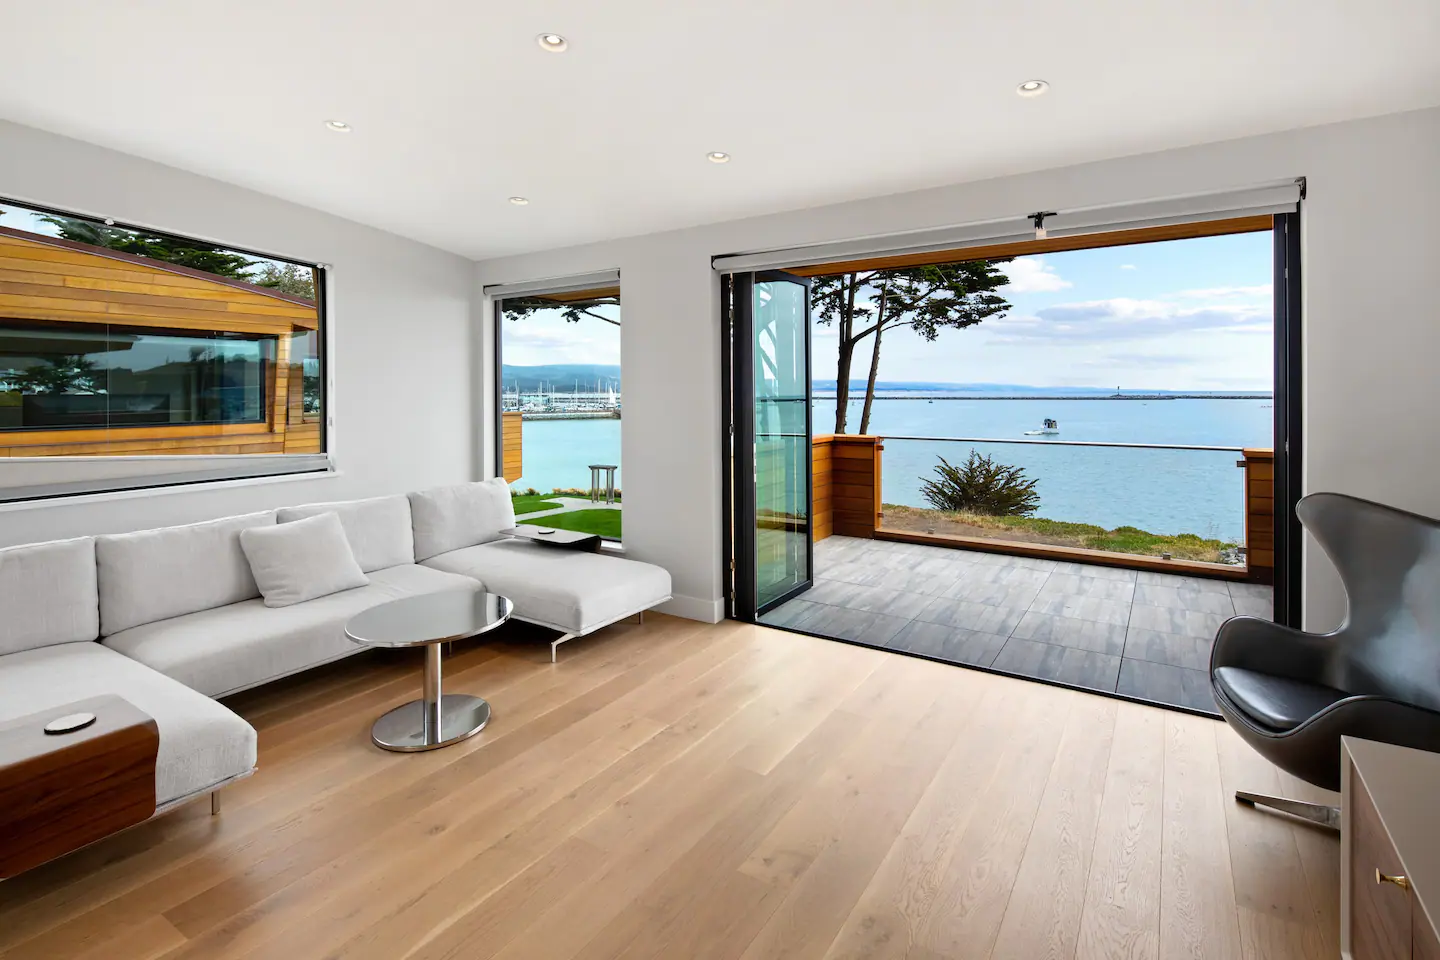 The living room connects to the deck which gives access to relaxing views.